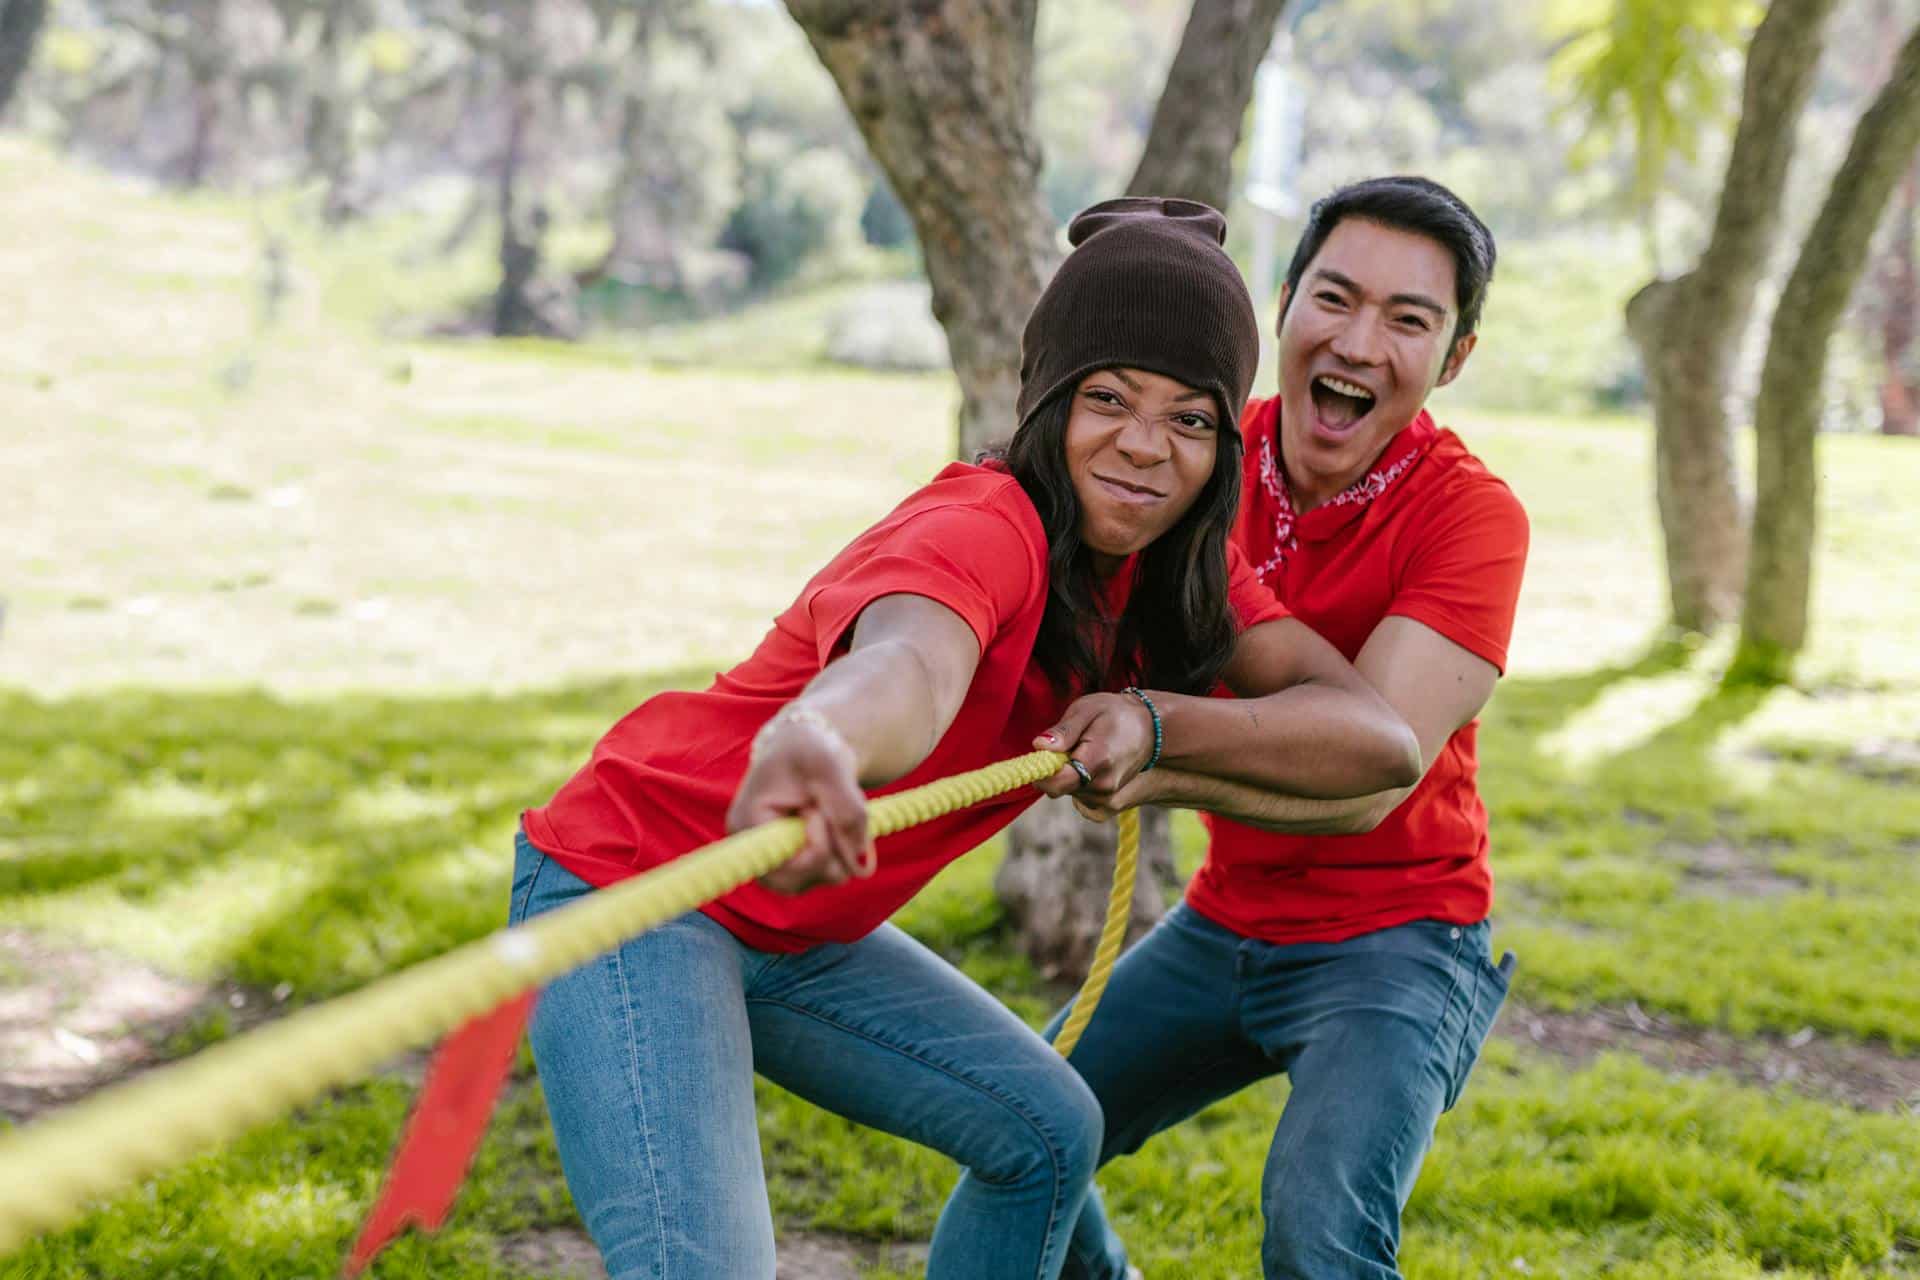 Two team members in red pull on one side of a tug-of-war rope